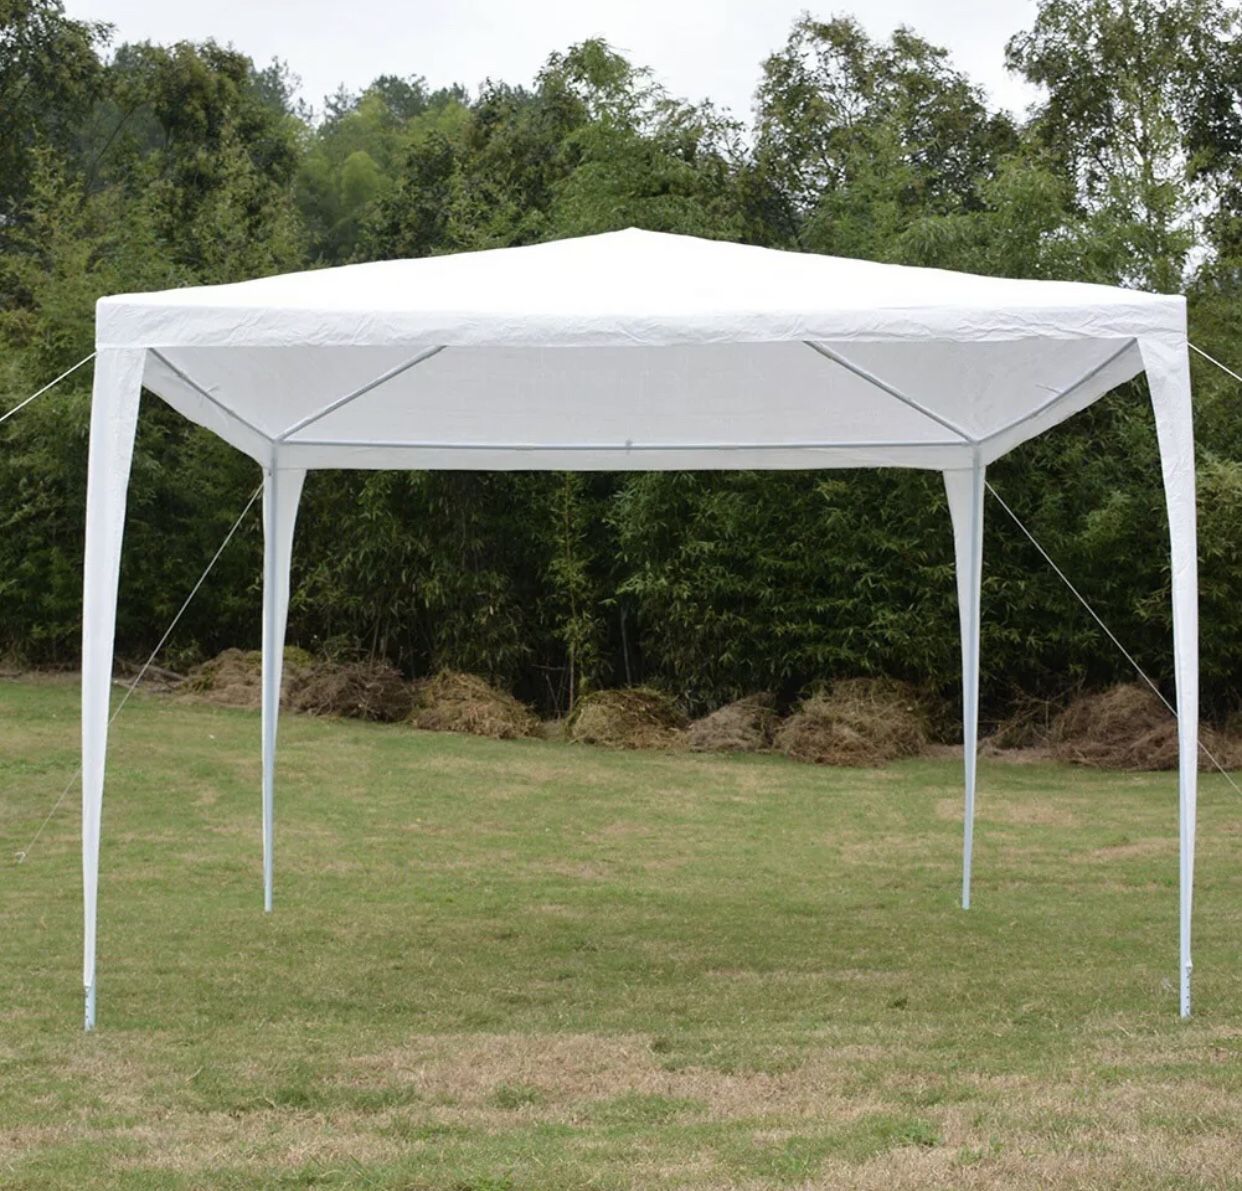 10x10 canopy tent party wedding outdoor 10 x 10